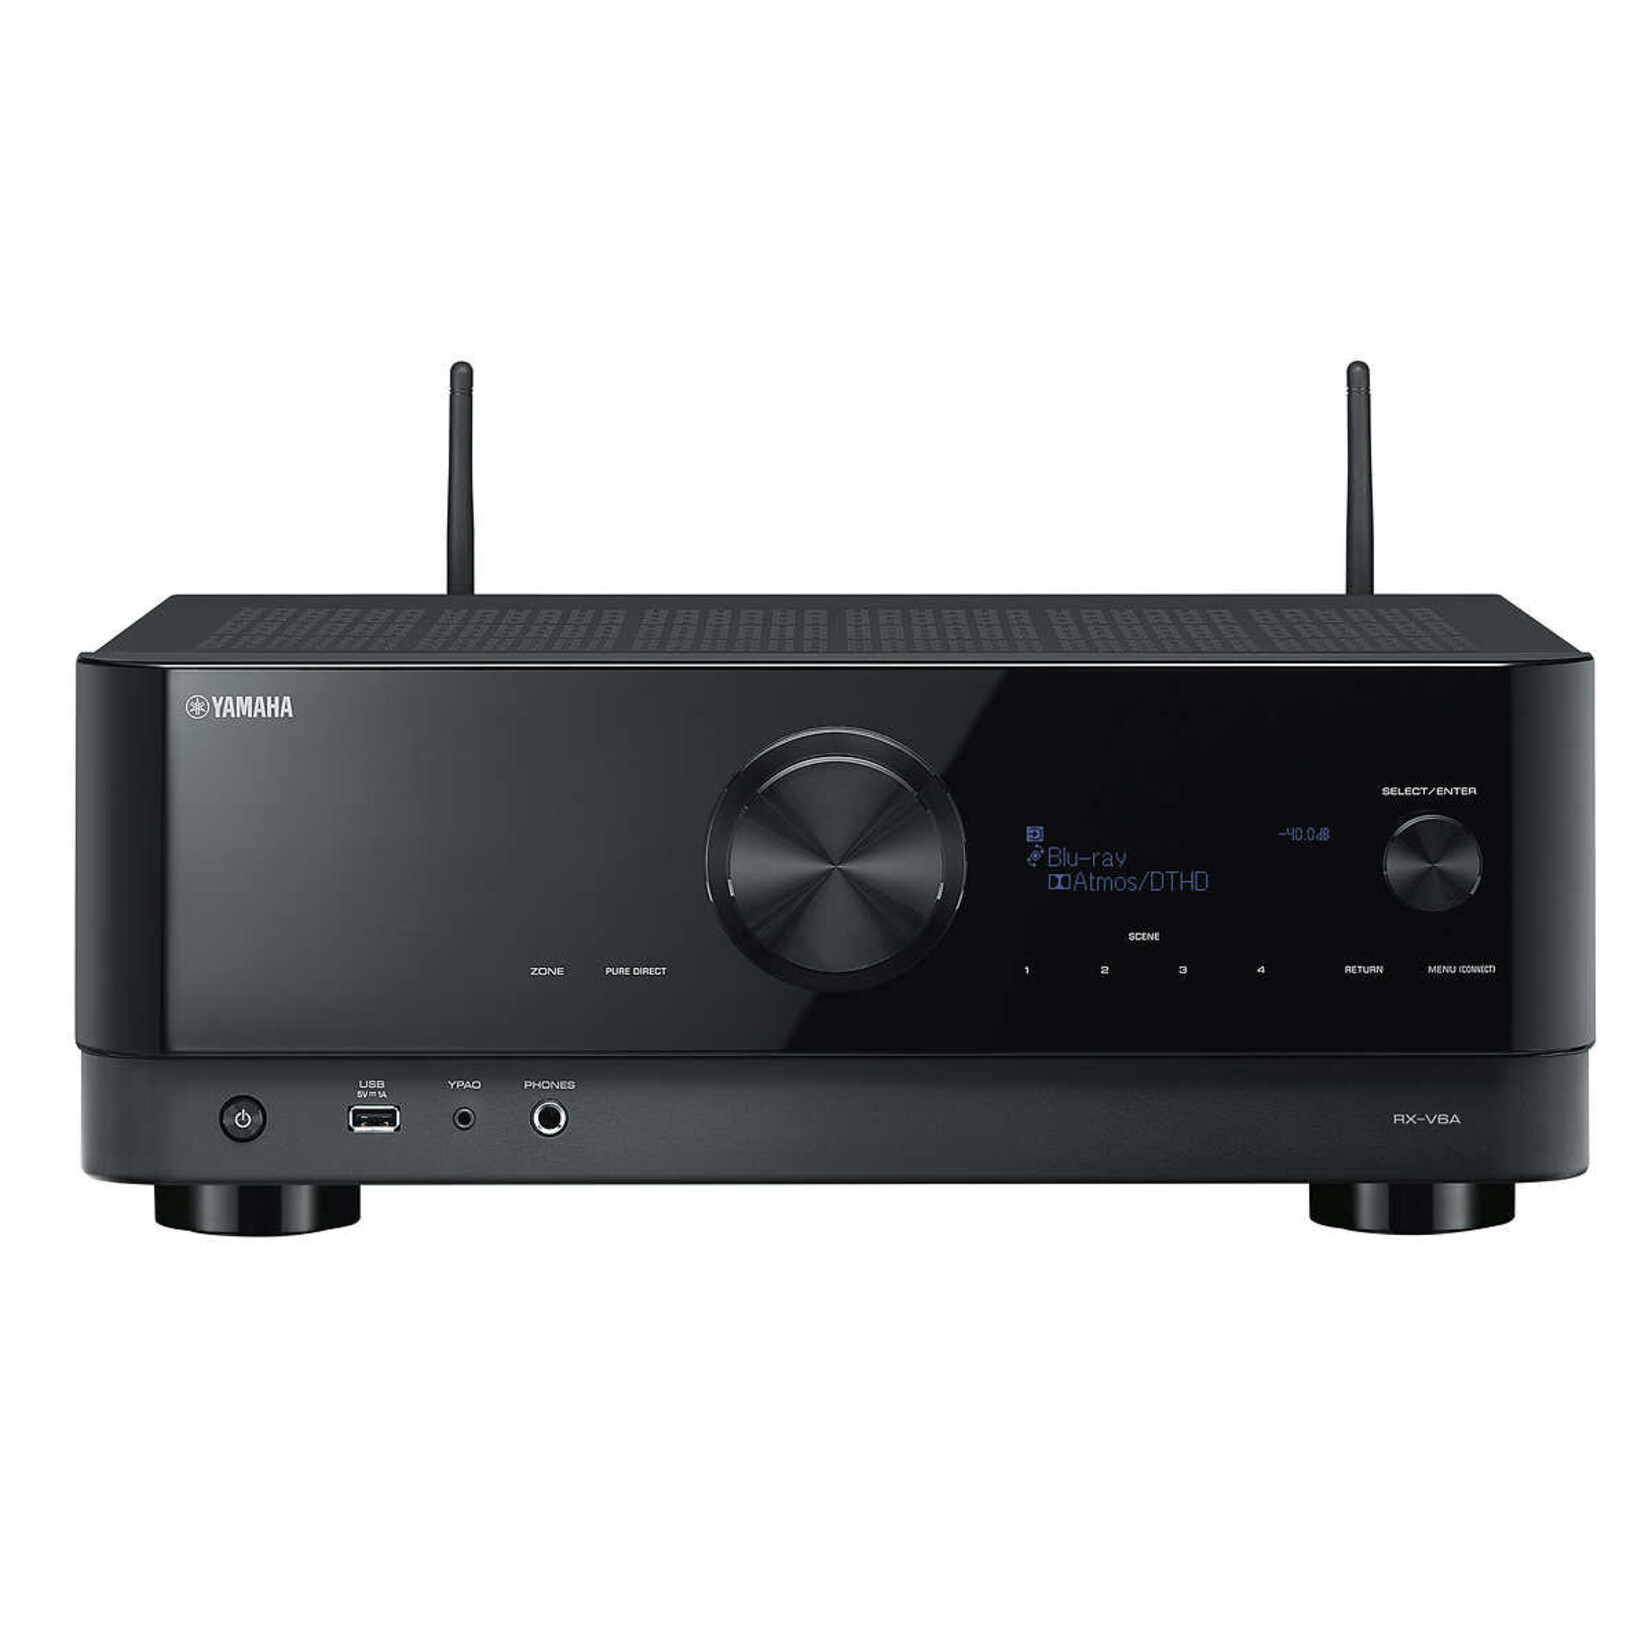 Yamaha RX-V6A Home Theater Receiver